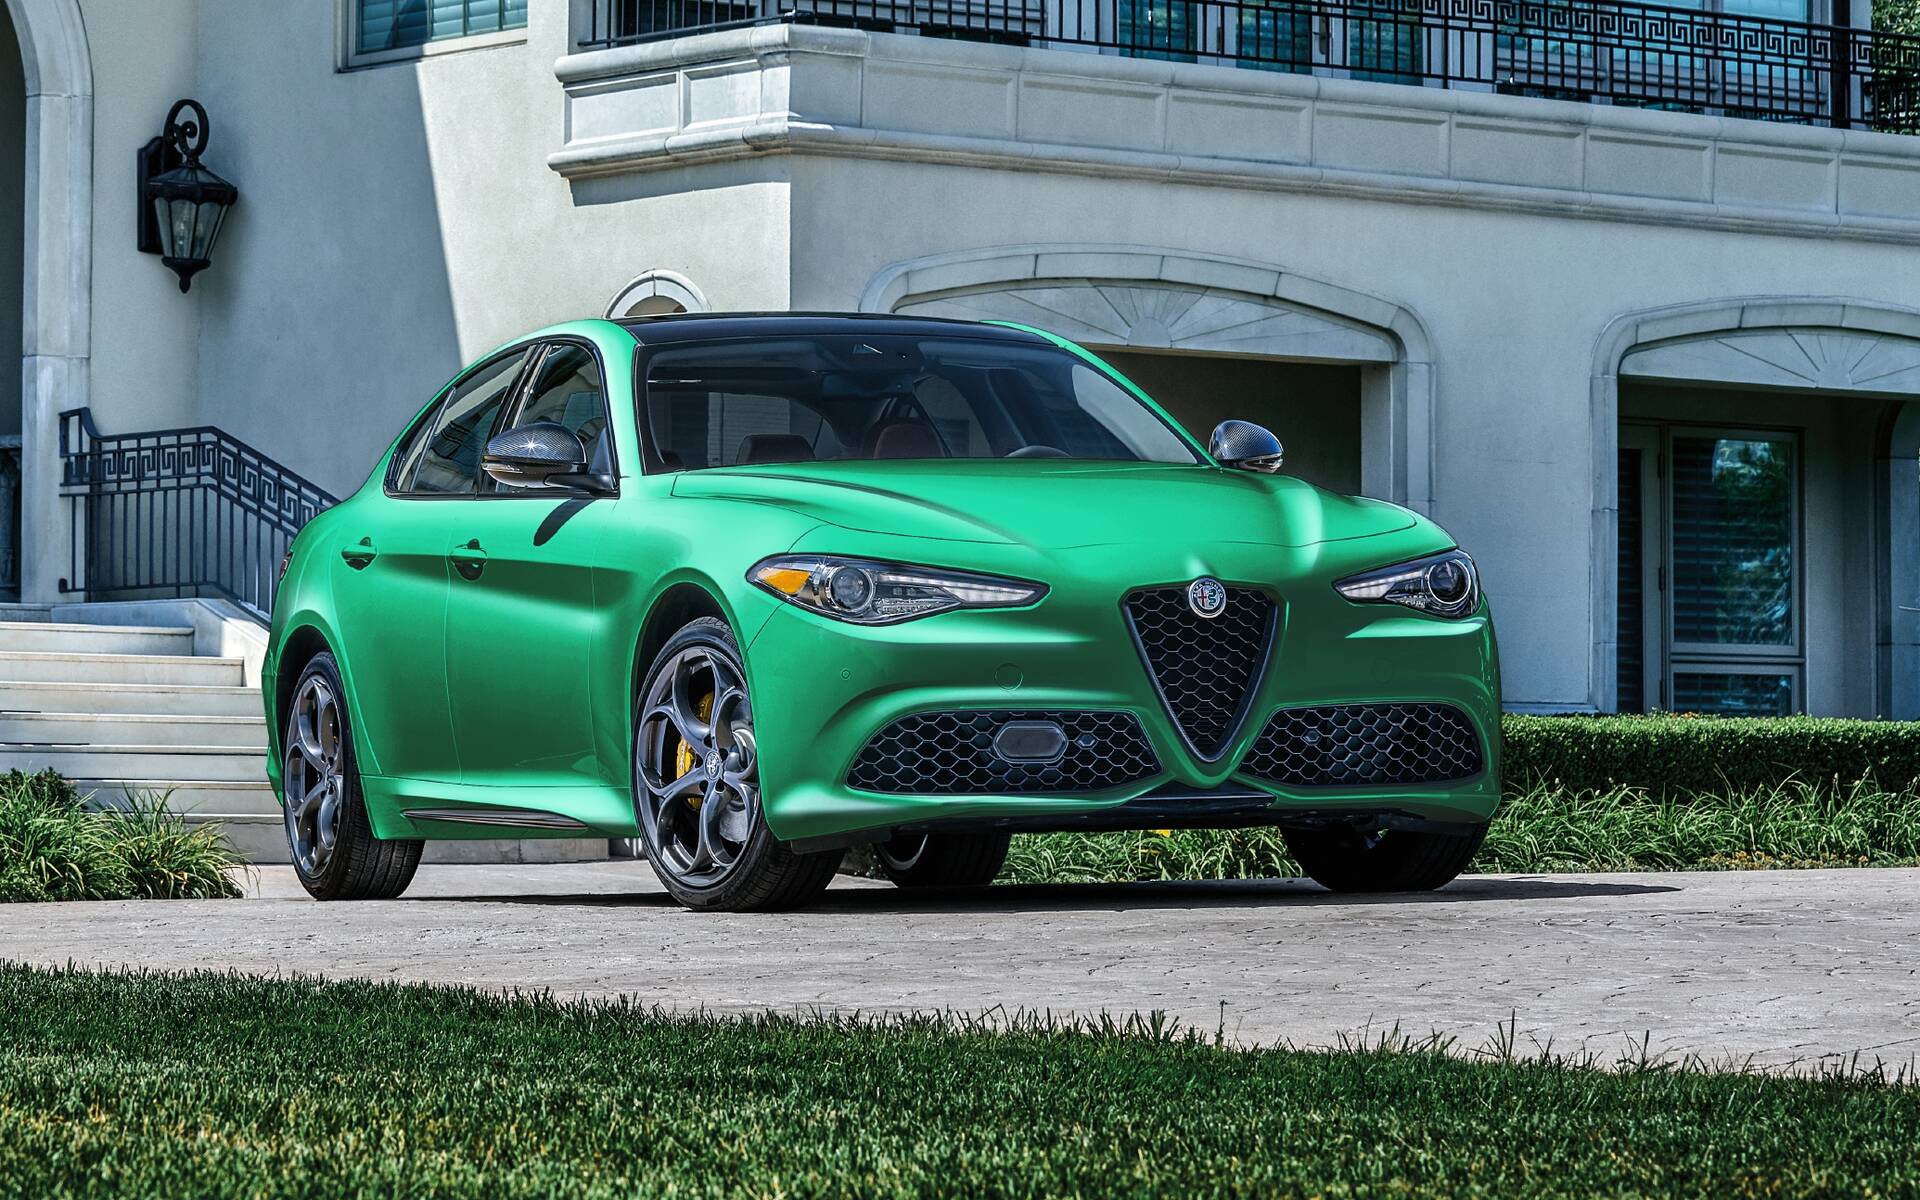 Alfa Romeo Giulia Speciale Gets 15 Units Only for Canada - The Car Guide